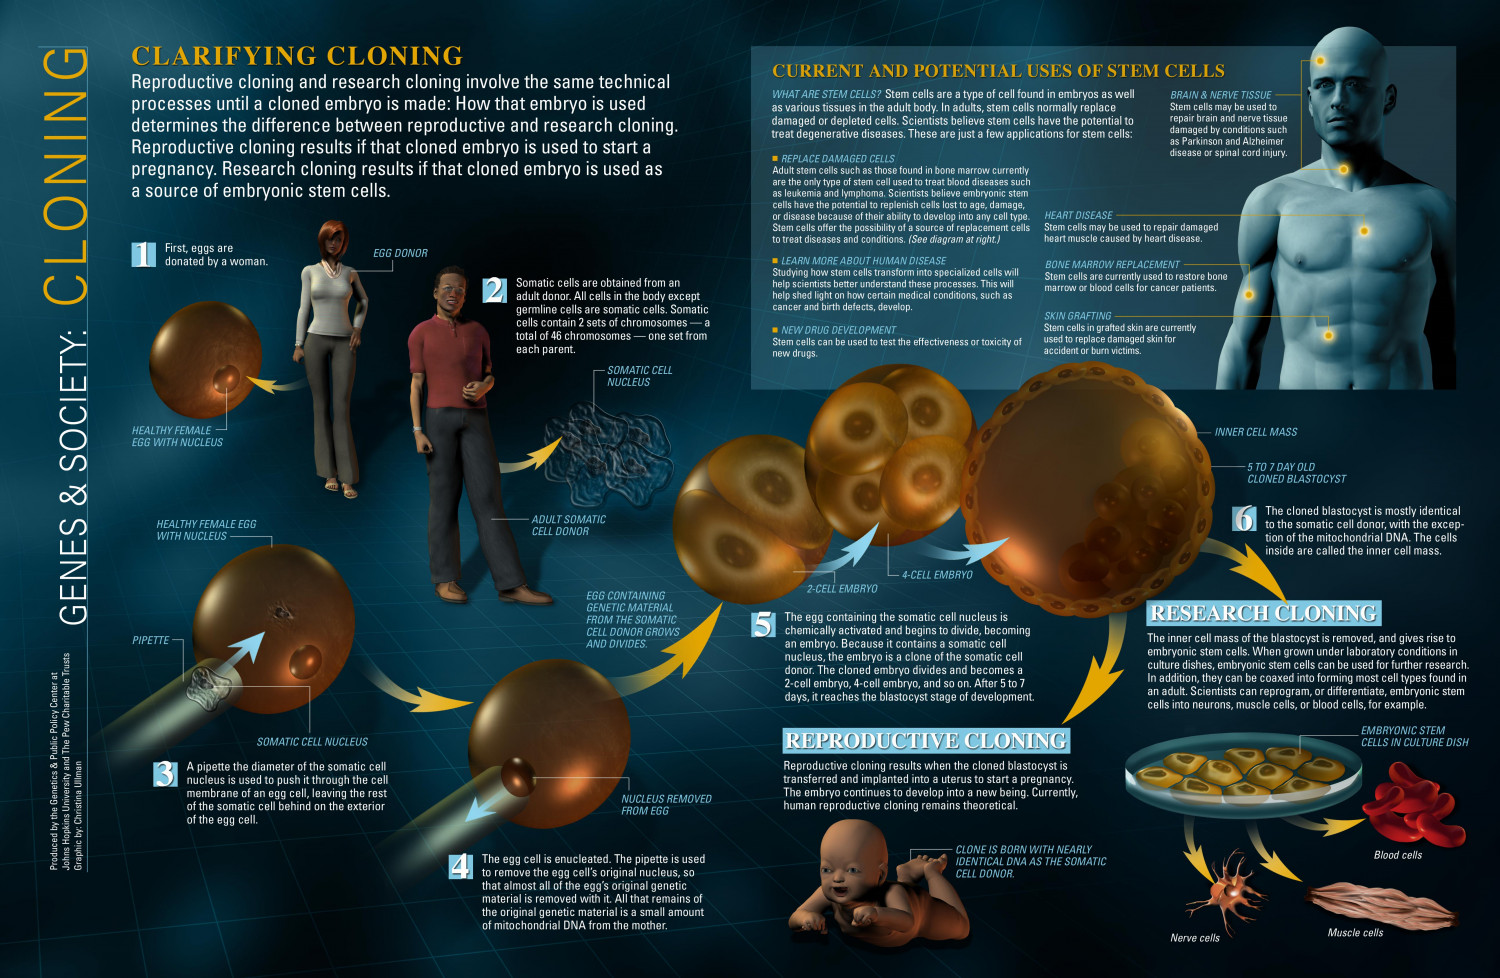 Genes & Society: Cloning Infographic